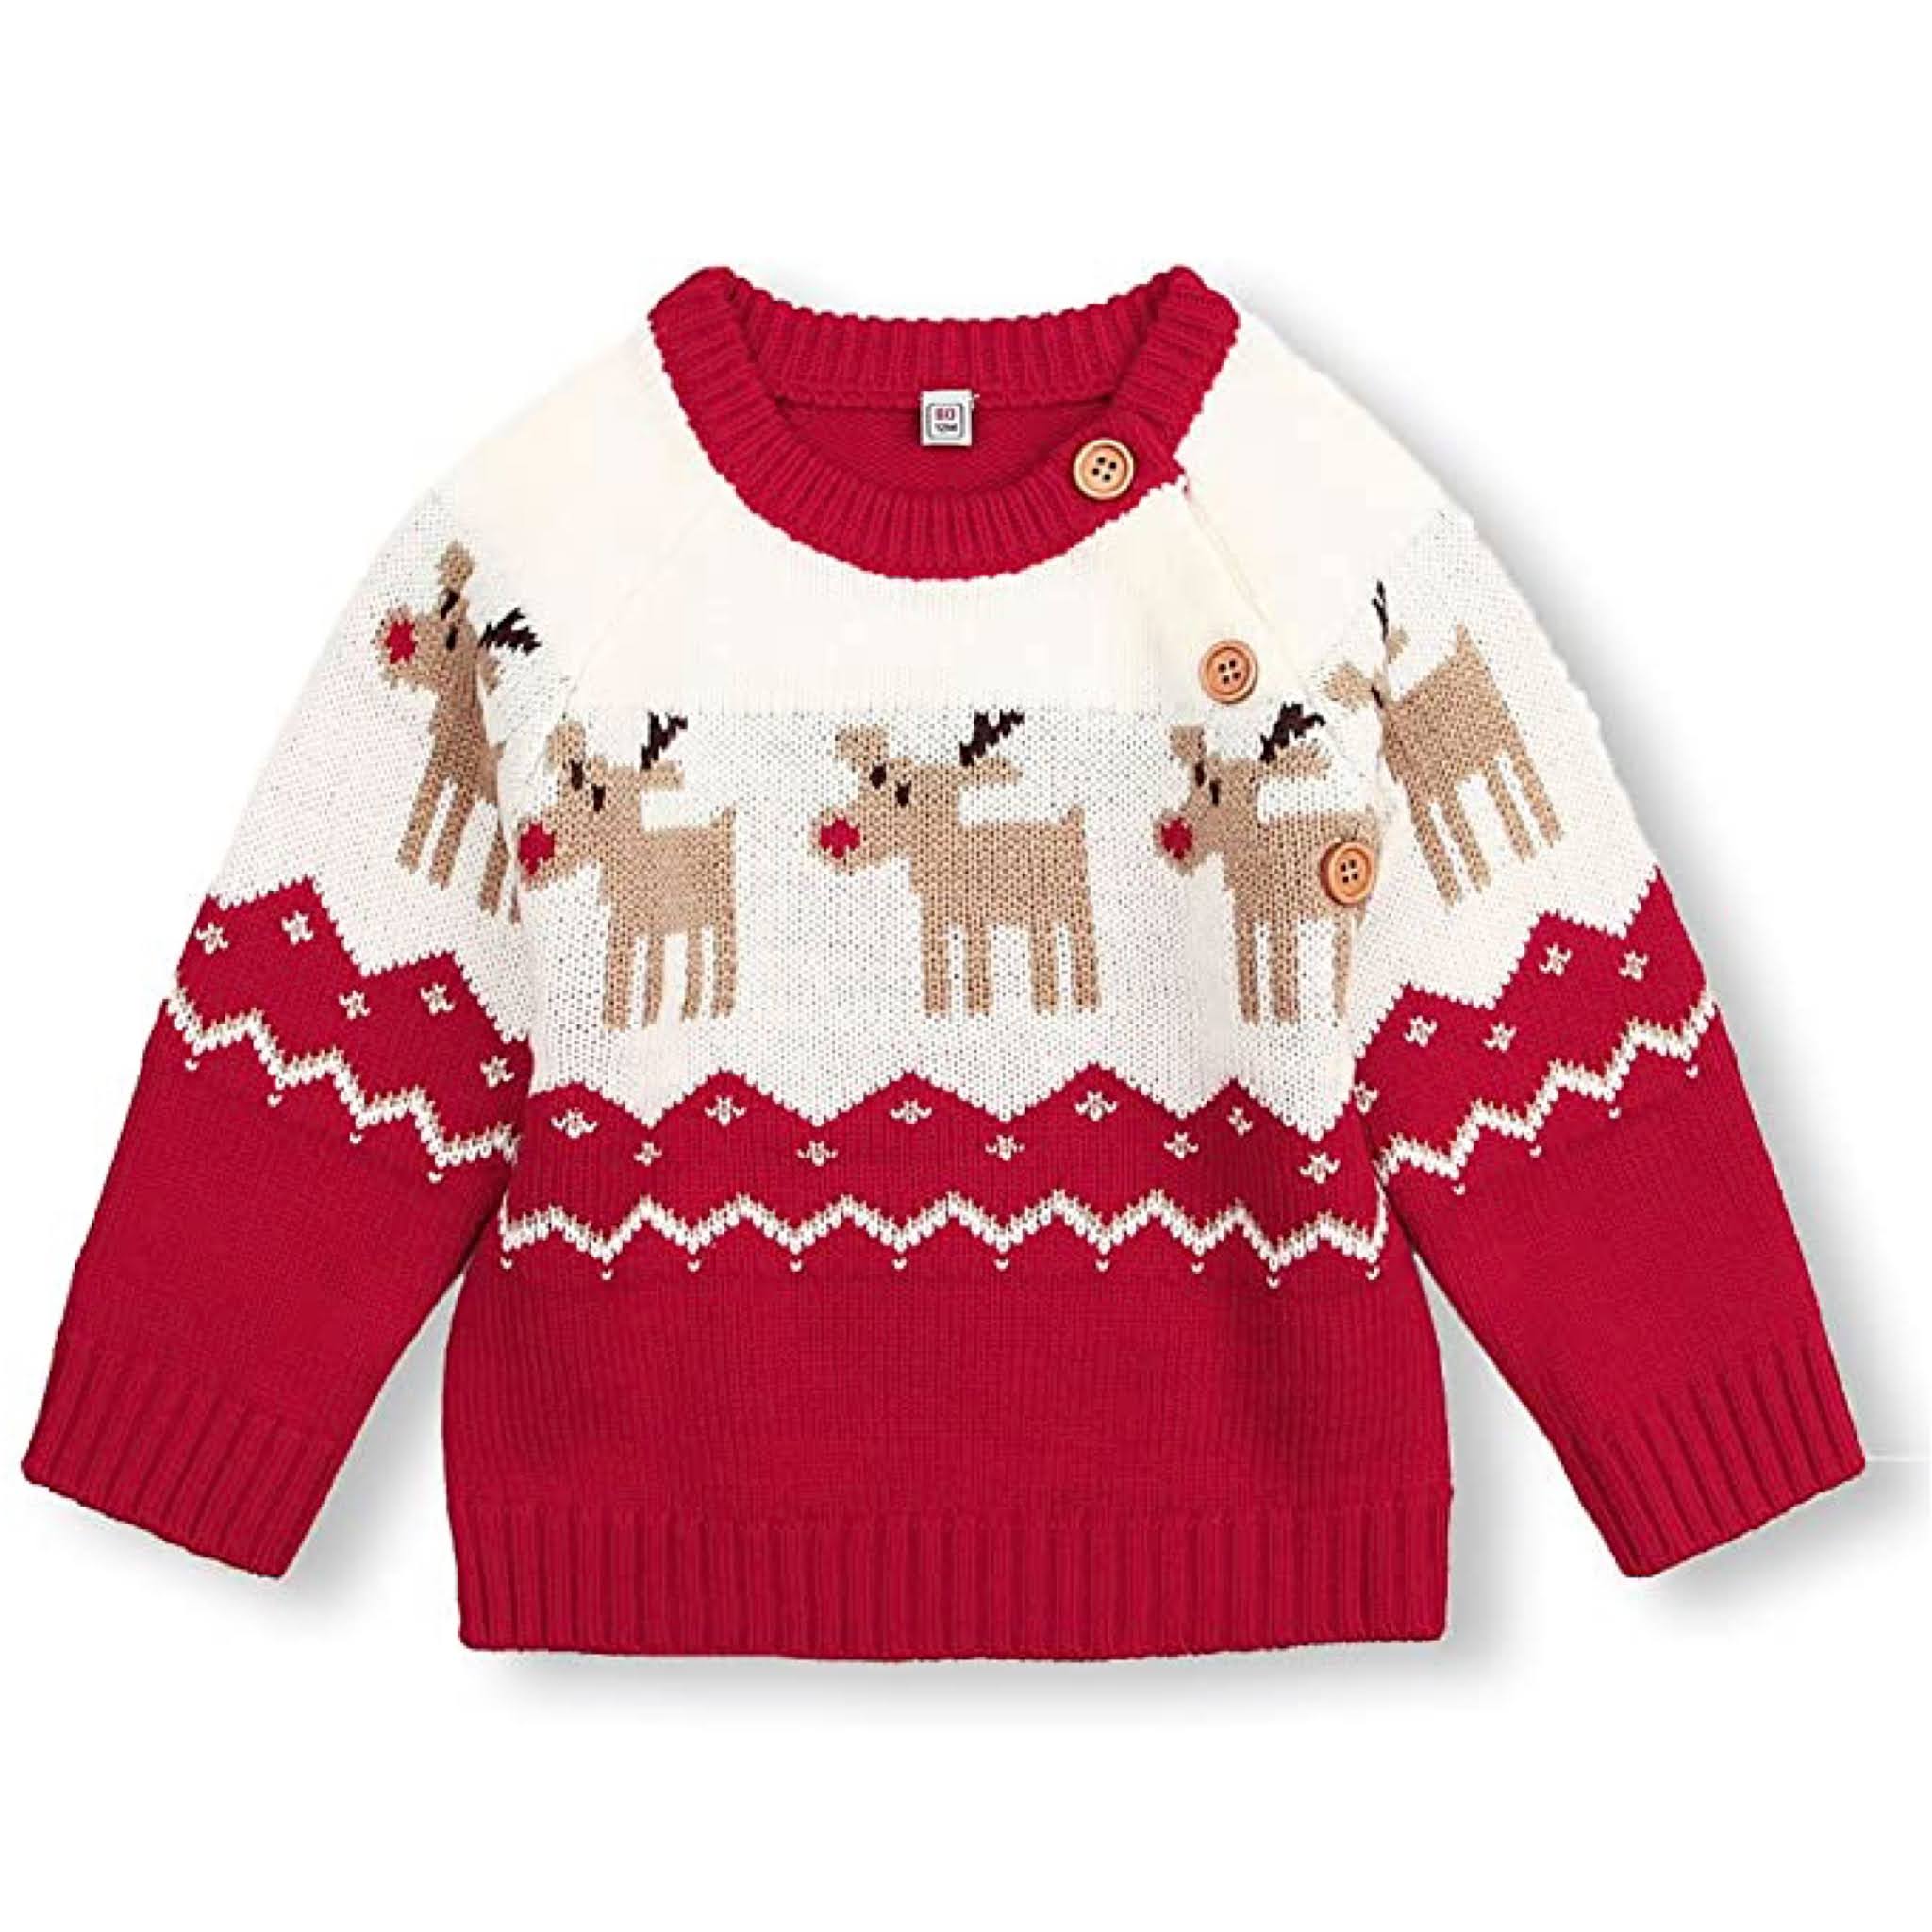 Baby & Toddler Reindeer Christmas Sweater from Amazon